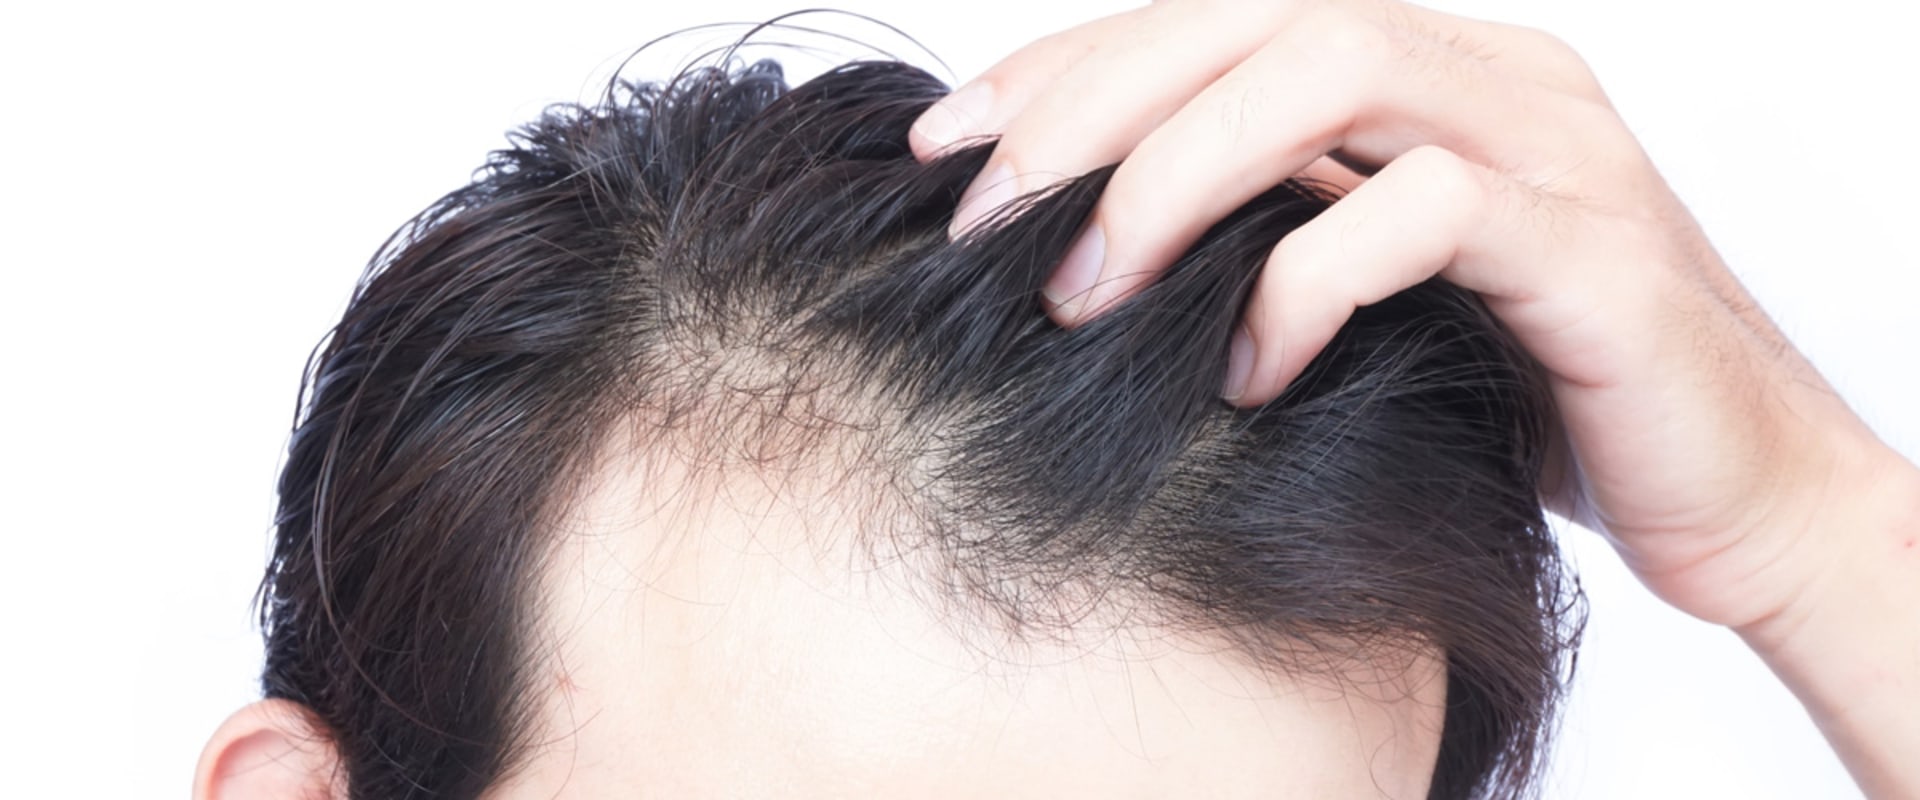 Is hair loss due to diet reversible?